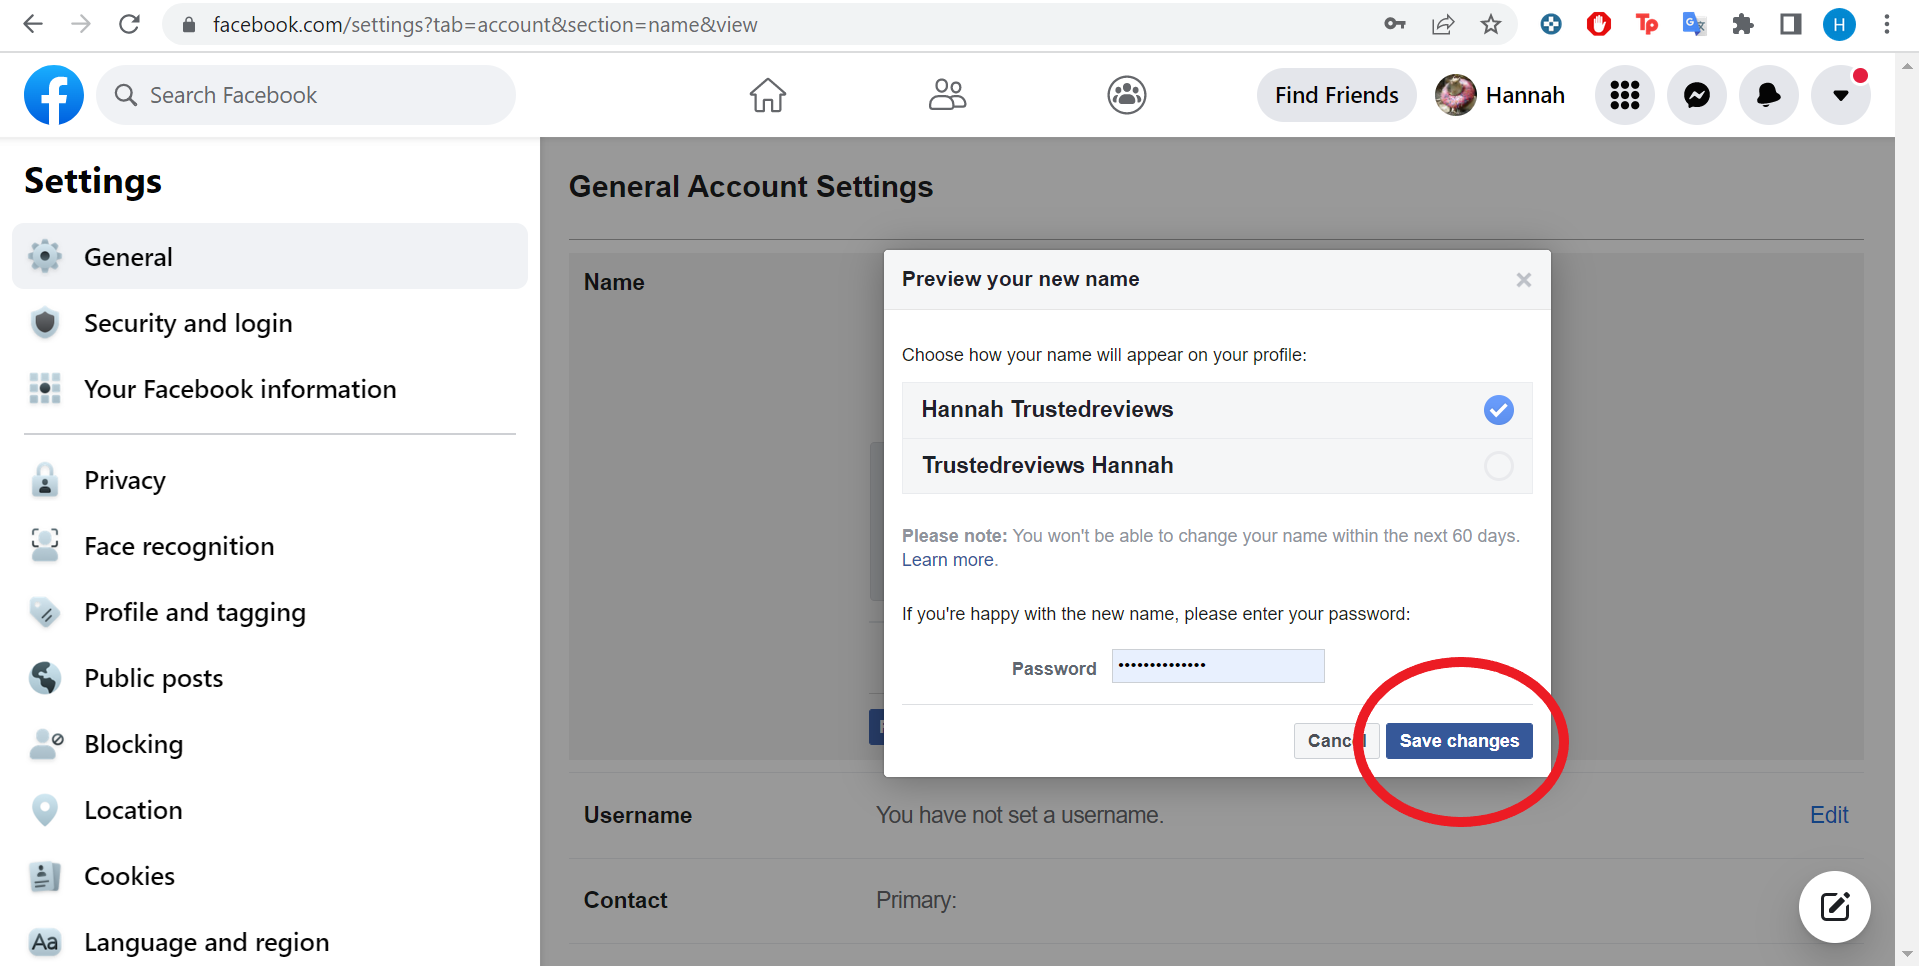 Enter your password and confirm your new name on Facebook